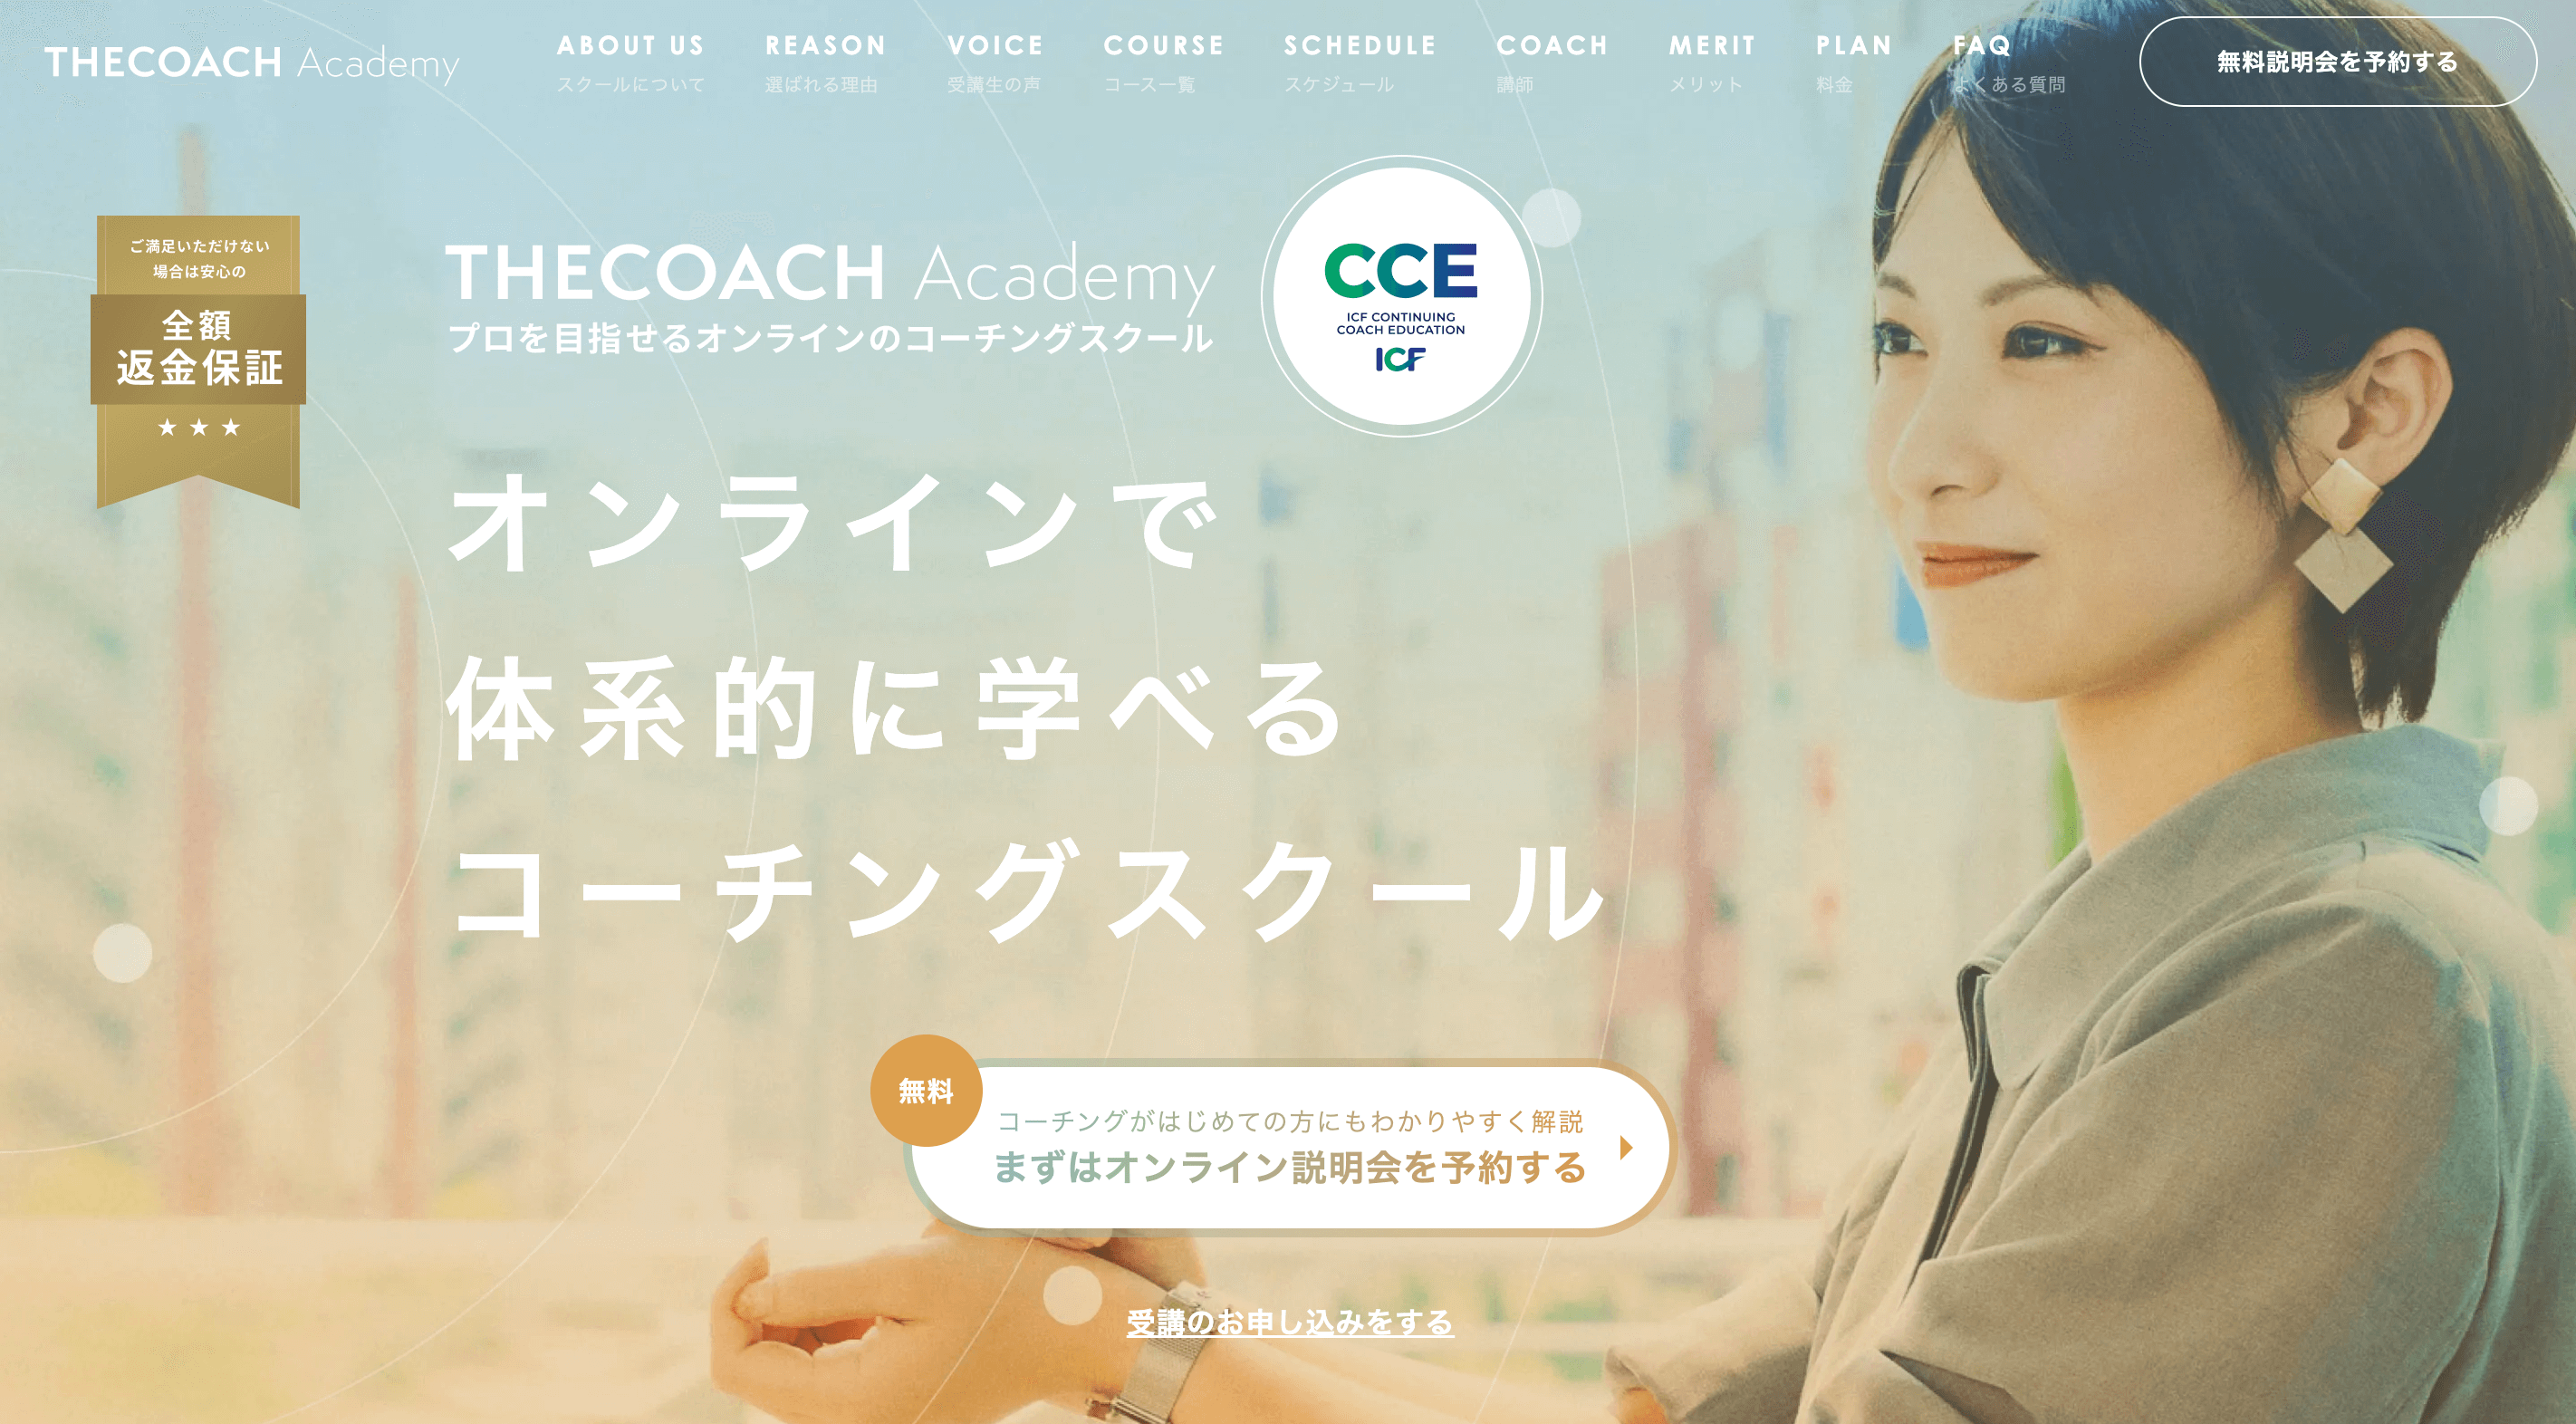 THECOACH Academy